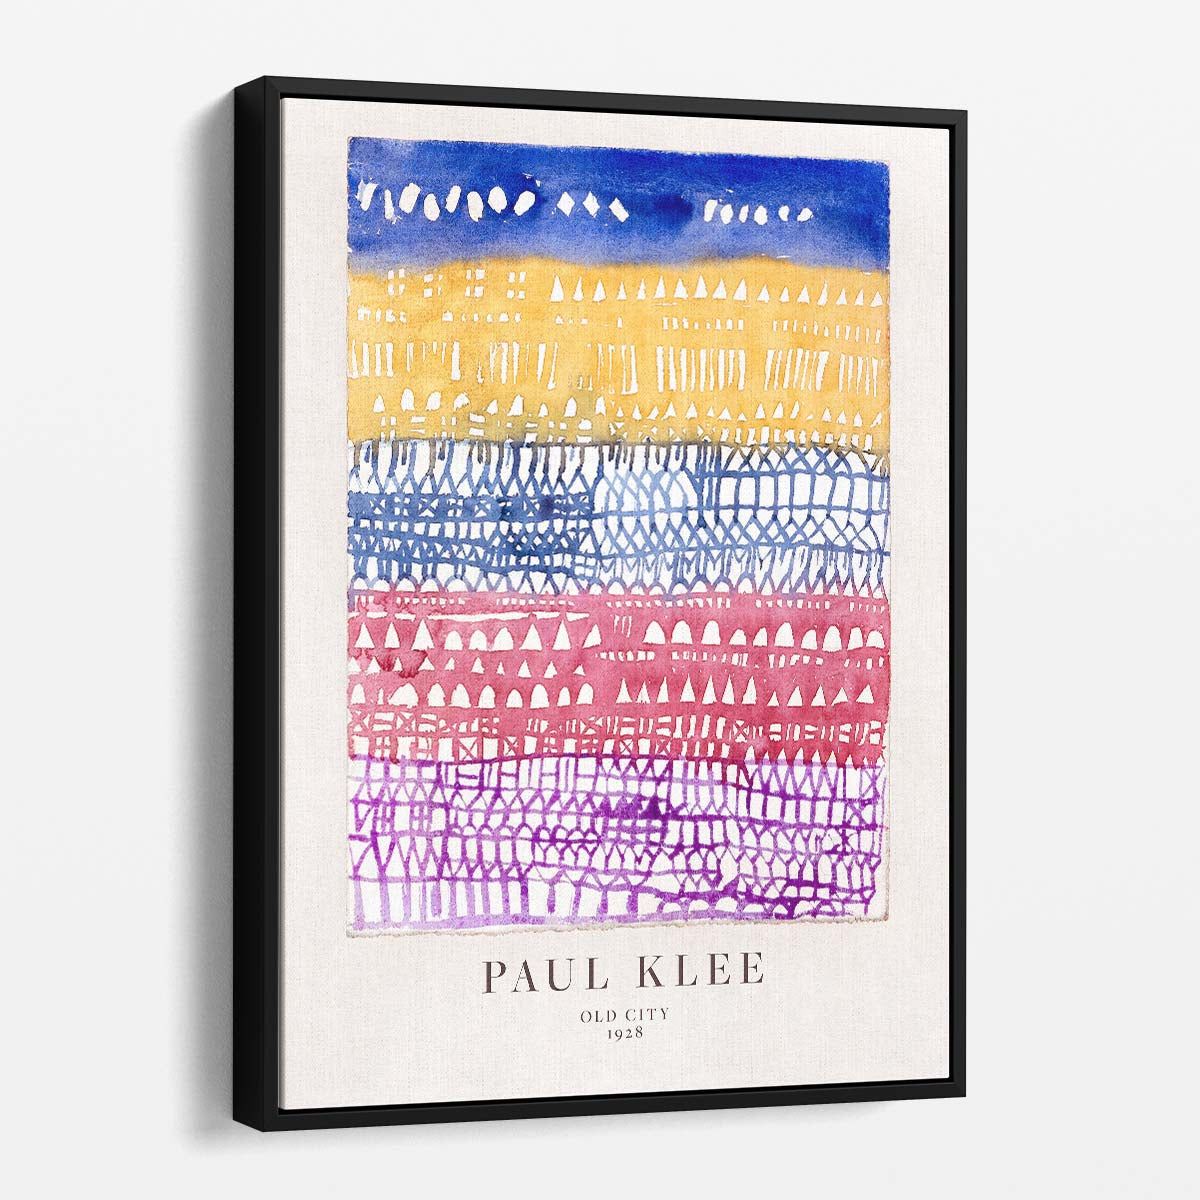 1928 Paul Klee Old City Watercolor Illustration Art Poster by Luxuriance Designs, made in USA